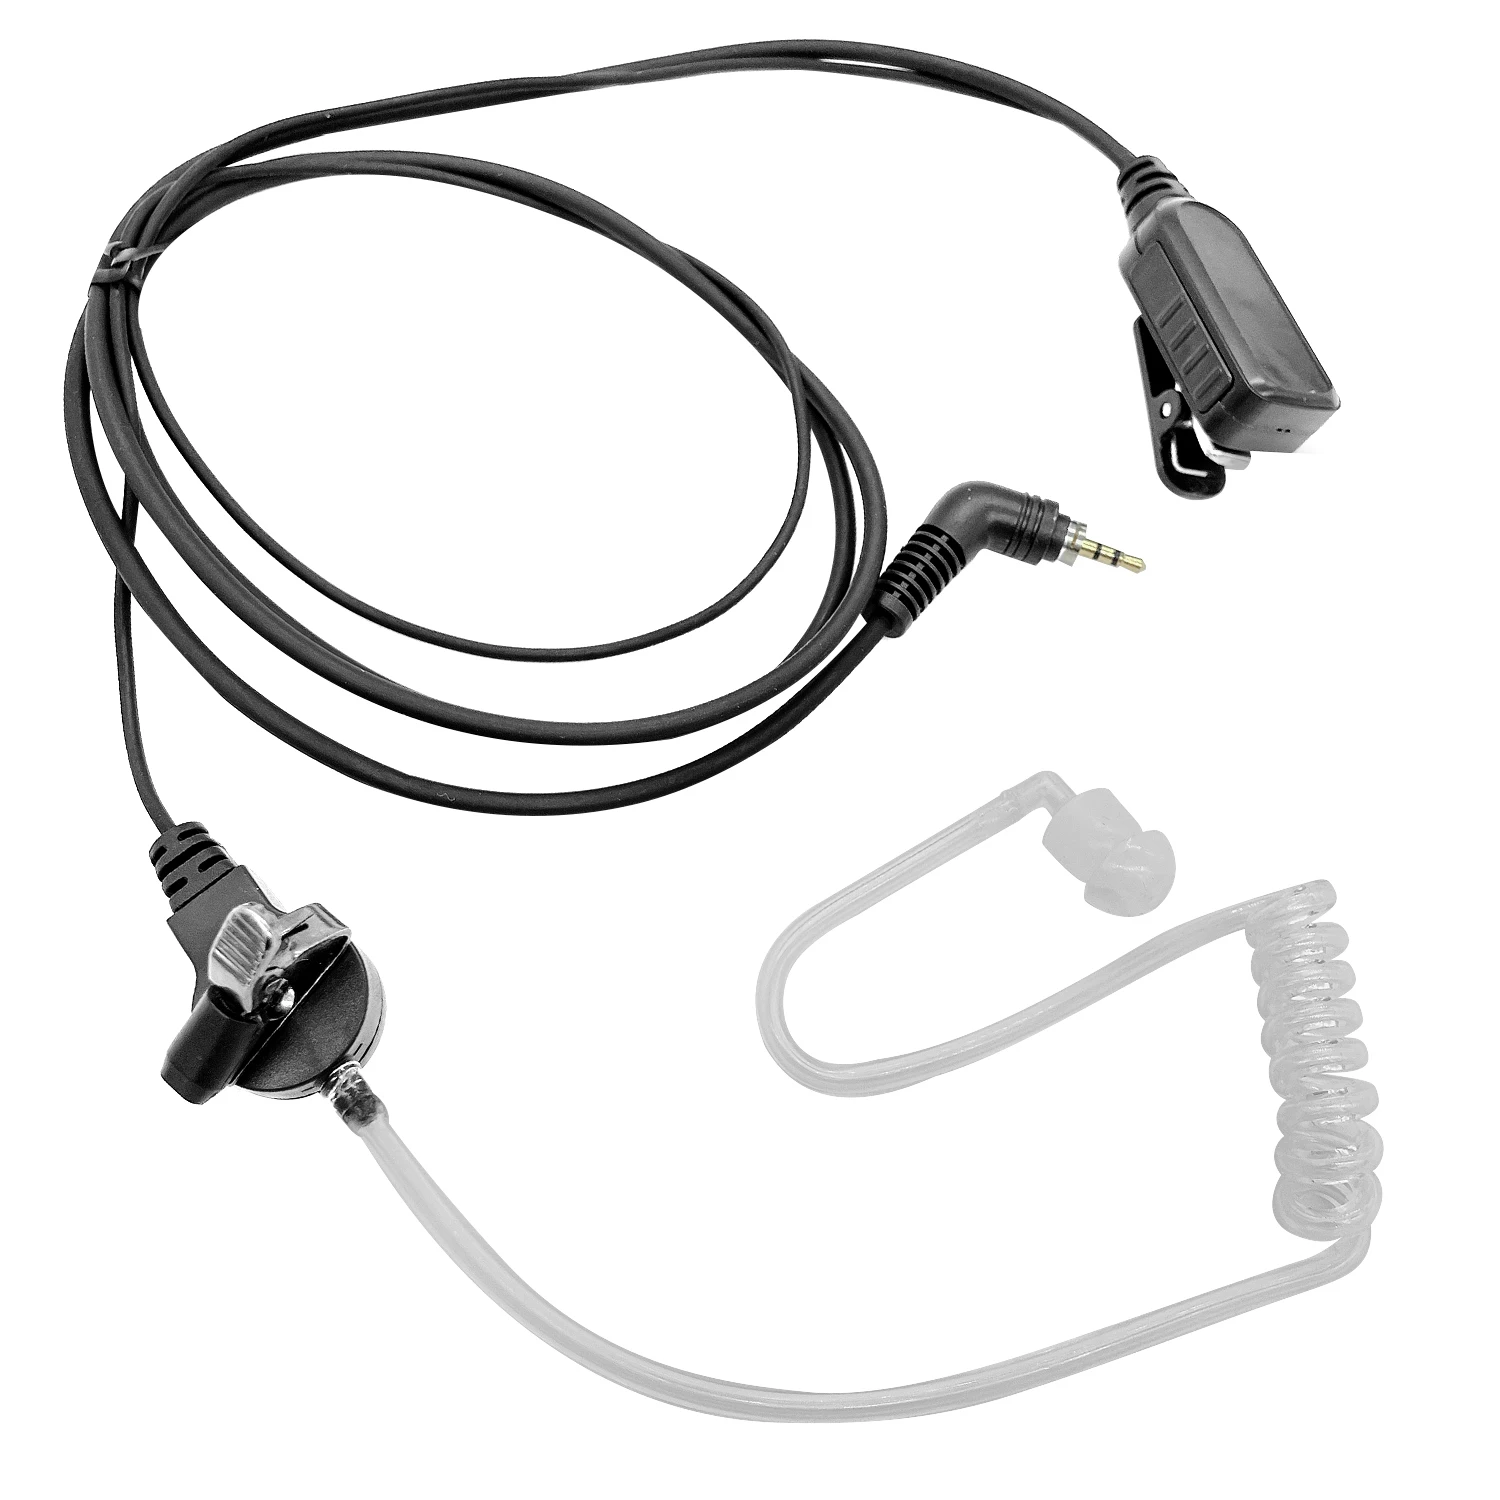 Earpiece walkie talkie Compatible with the following Models for motorola Two Way Radio:MTP850